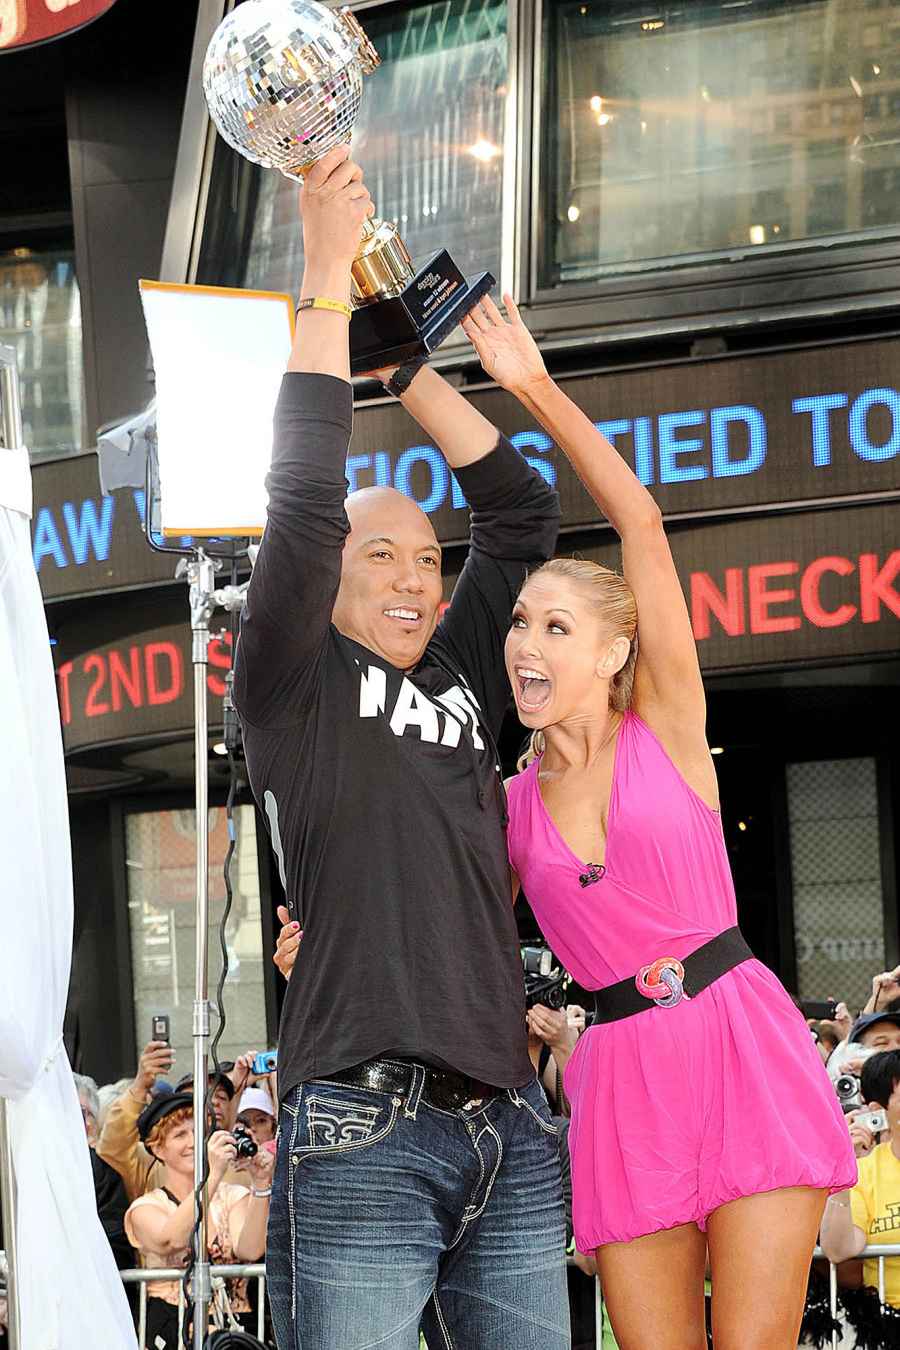 Dancing With the Stars Winners Through the Years Mirrorball Champs From 2005 to Now Hines Ward Kym Johnson